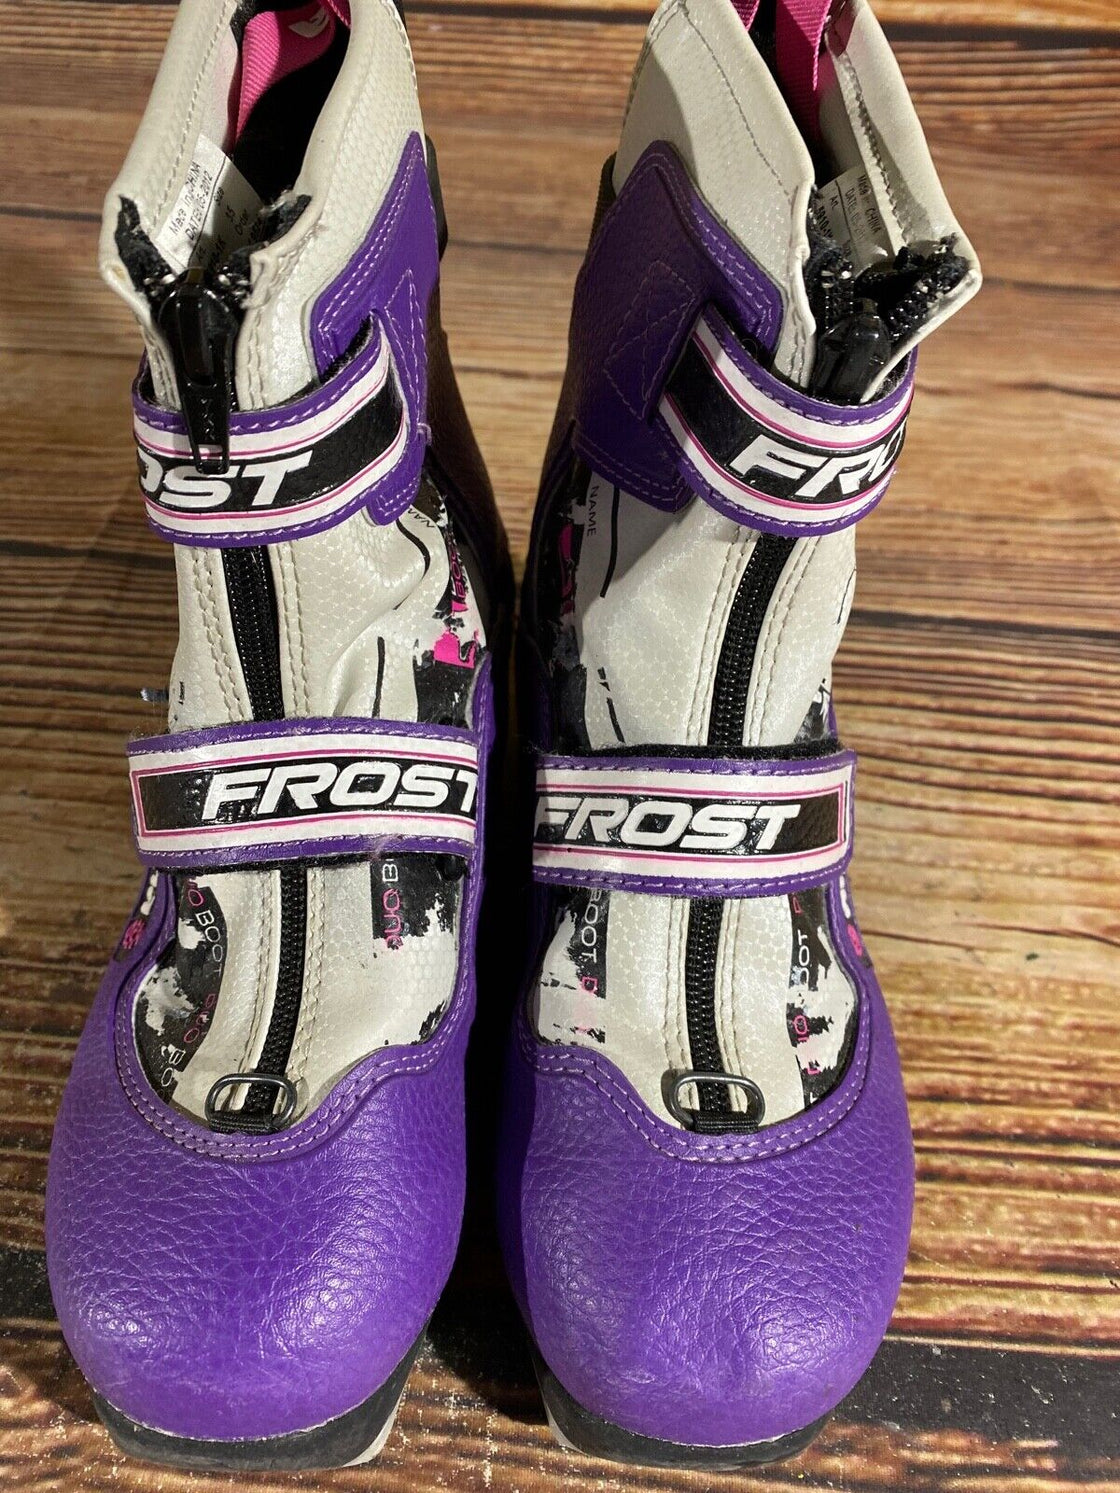 Alpina Frost Kids Nordic Cross Country Ski Boots Size EU35 US3.5 NNN A-988